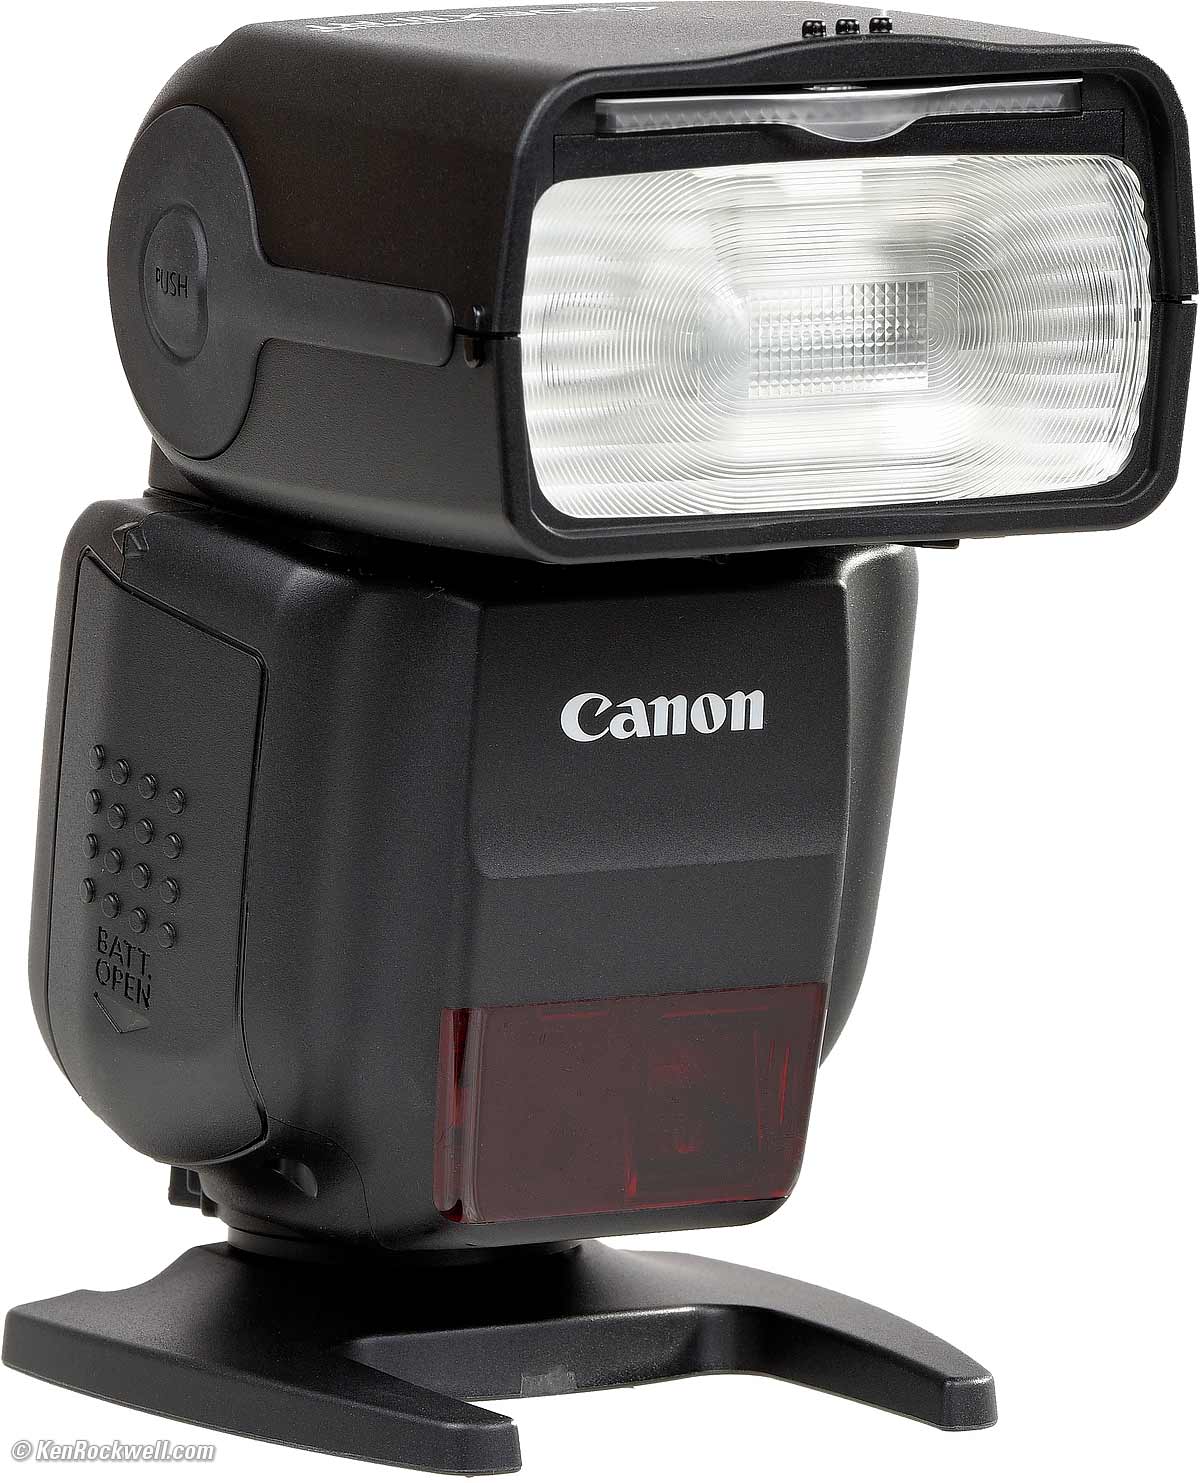 Canon 430EX III RT Review